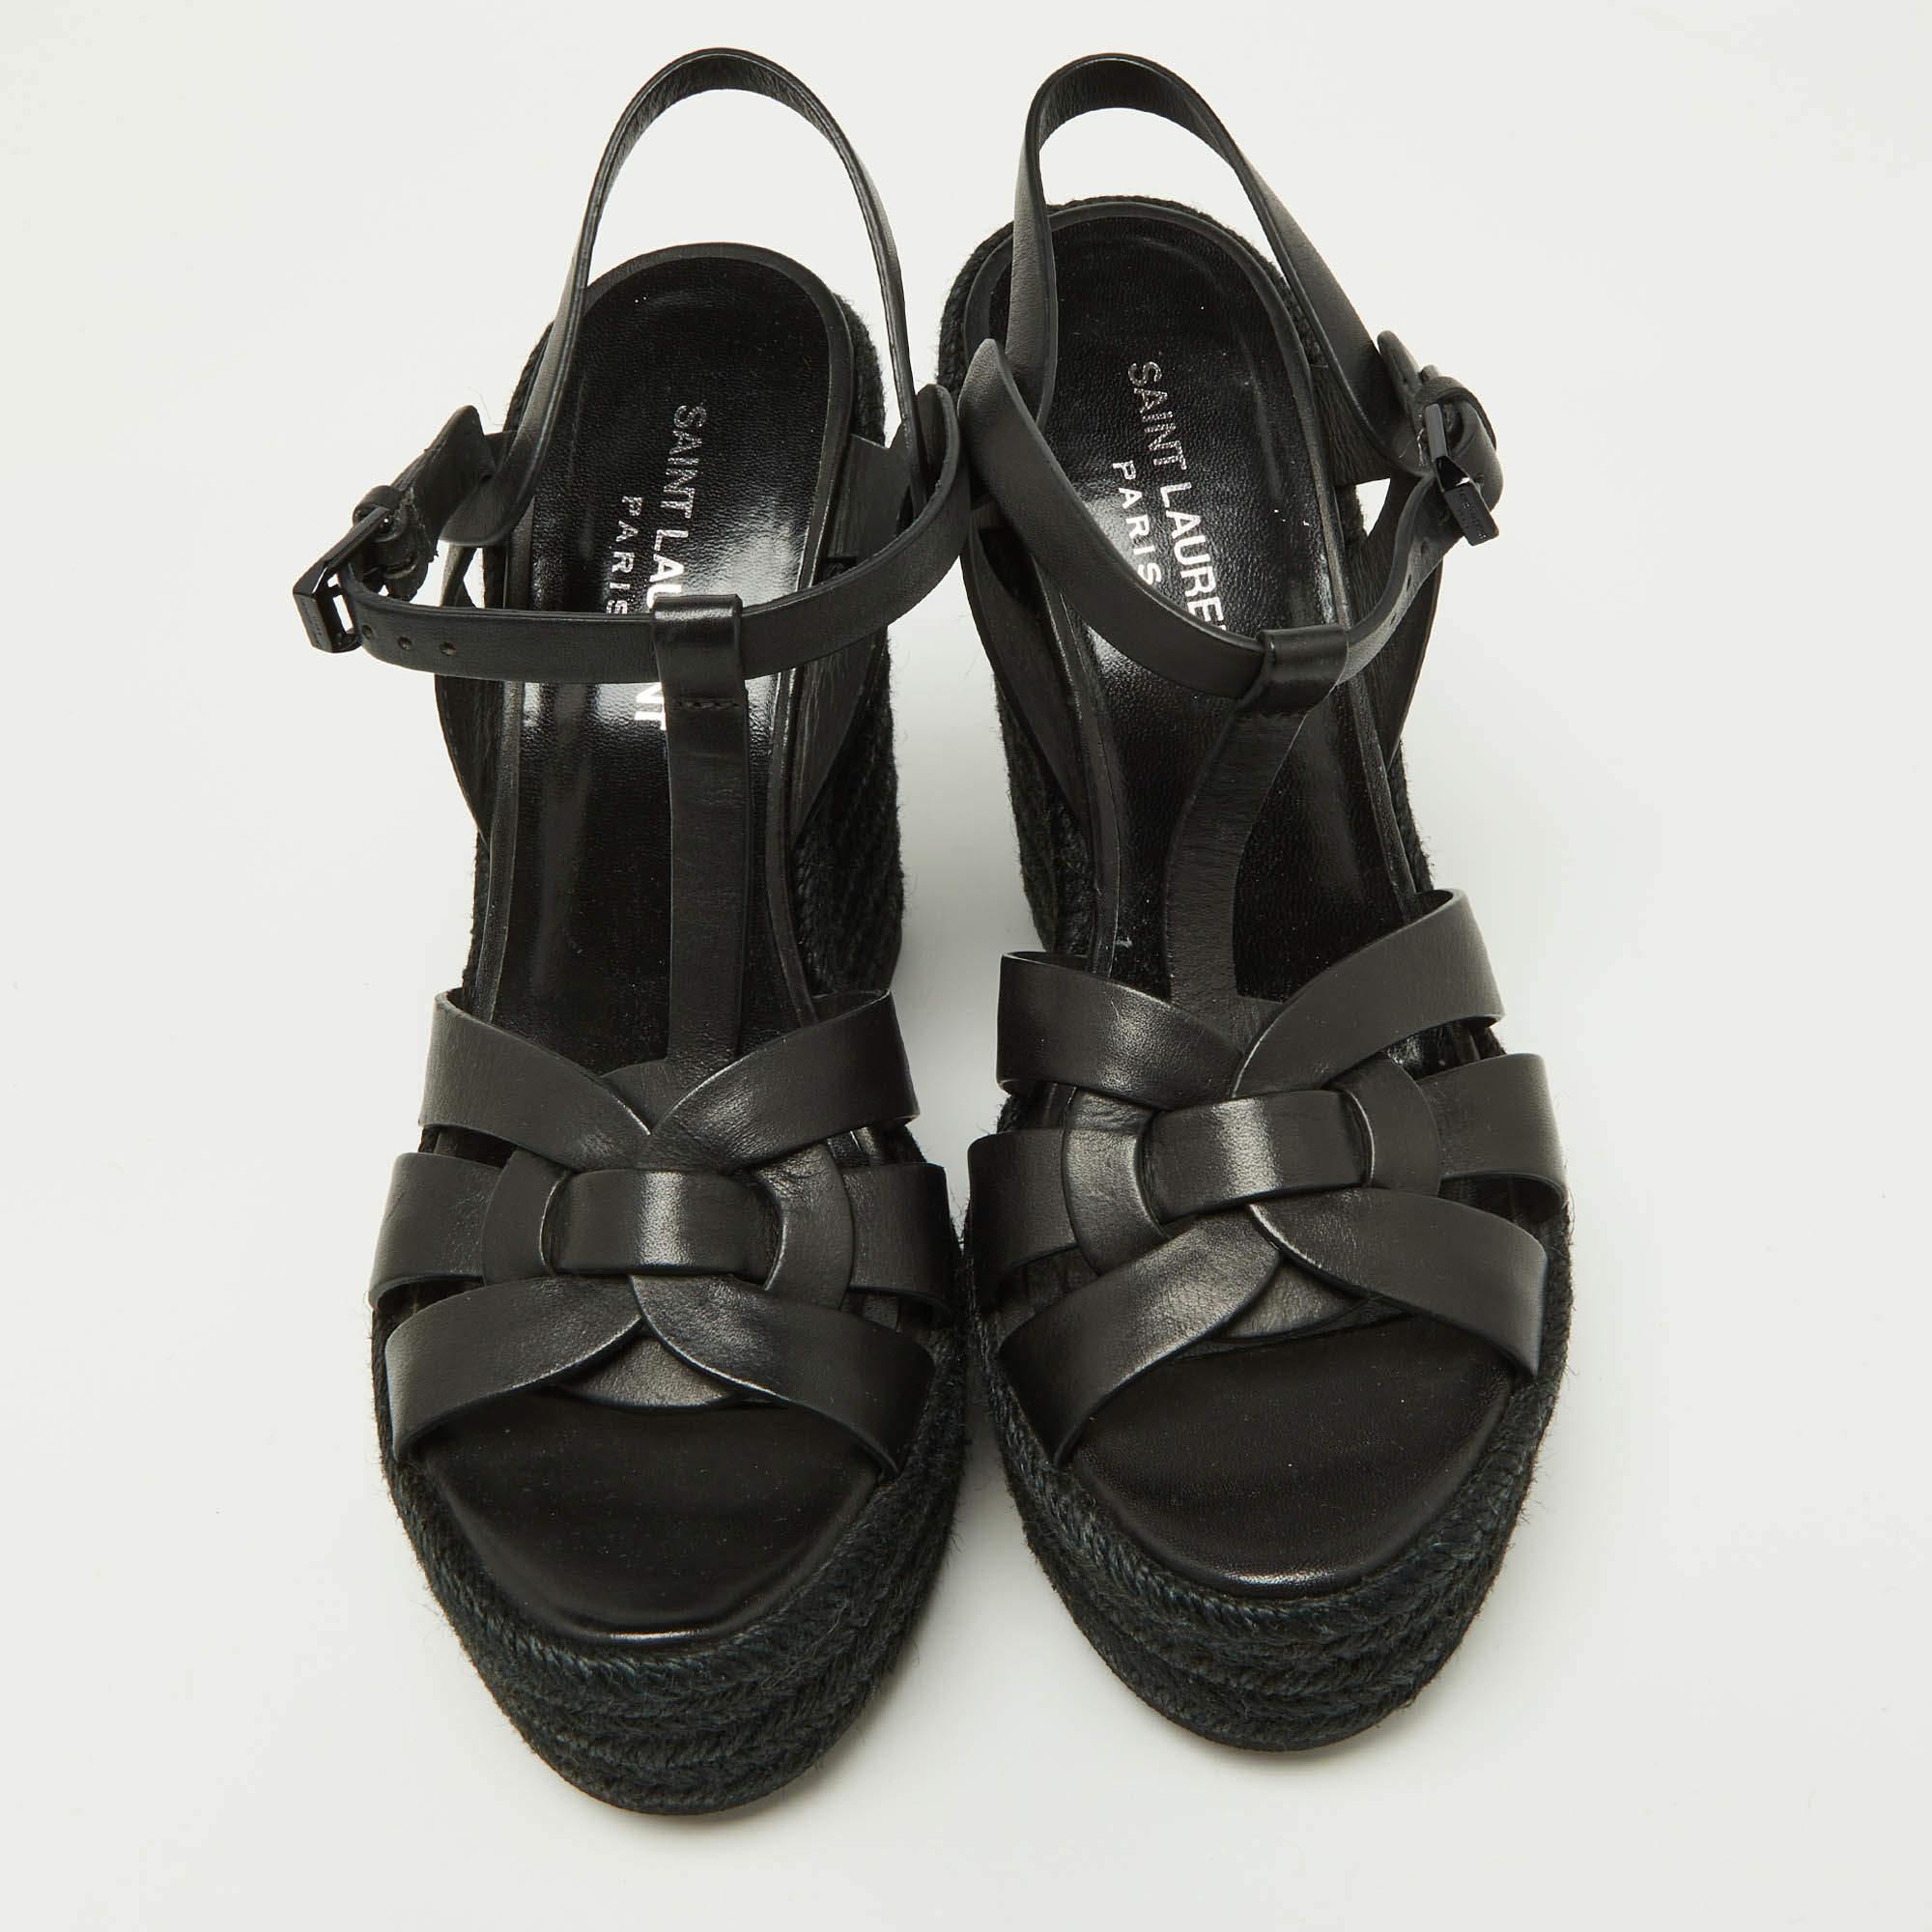 Absolutely on-trend and easy to flaunt, this pair of wedge sandals by Saint Laurent Paris is a true stunner. They've been wonderfully styled with leather straps and elevated on 13.5 cm espadrille wedges. Complete with ankle fastenings and snug